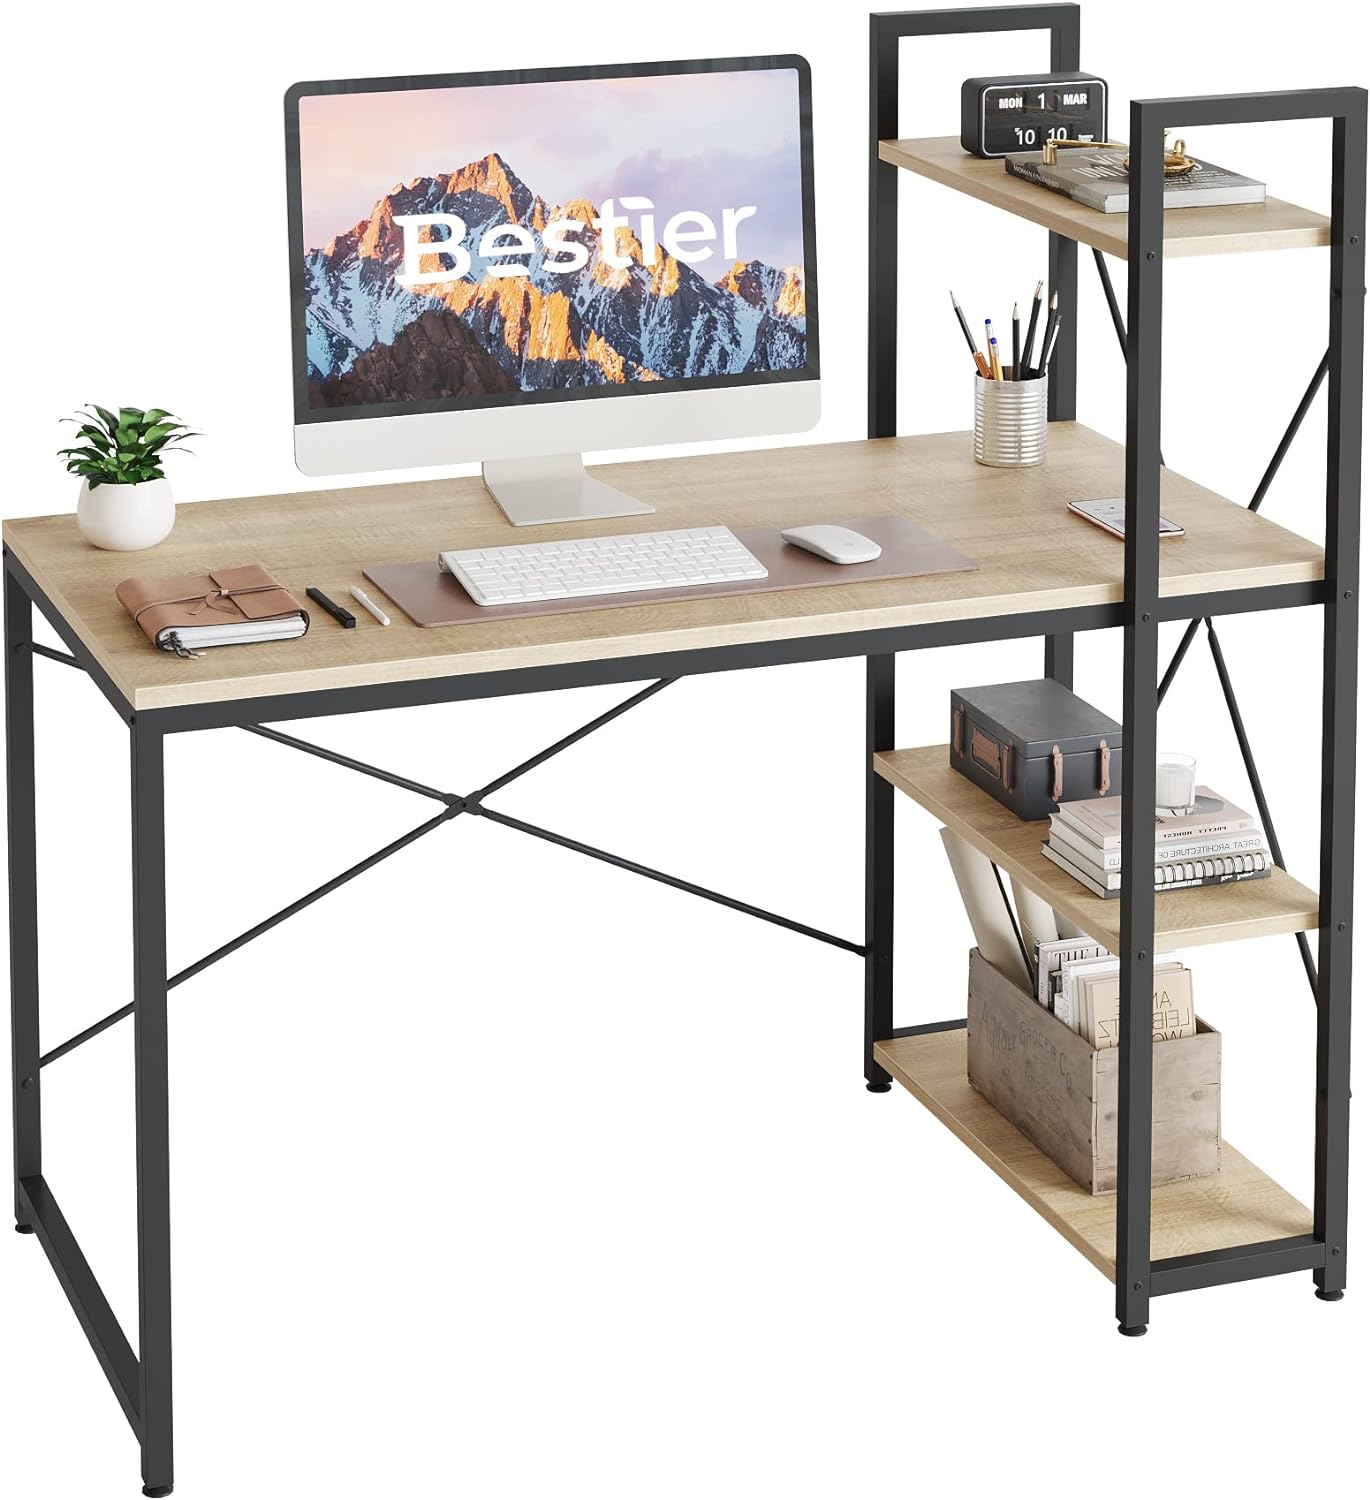 Bestier Computer Desk with Shelves - 47 Inch Small Space Home Office Desks with Bookshelf for Study Writing and Work - Plenty Leg Room and Easy Assemble, Natural Oak